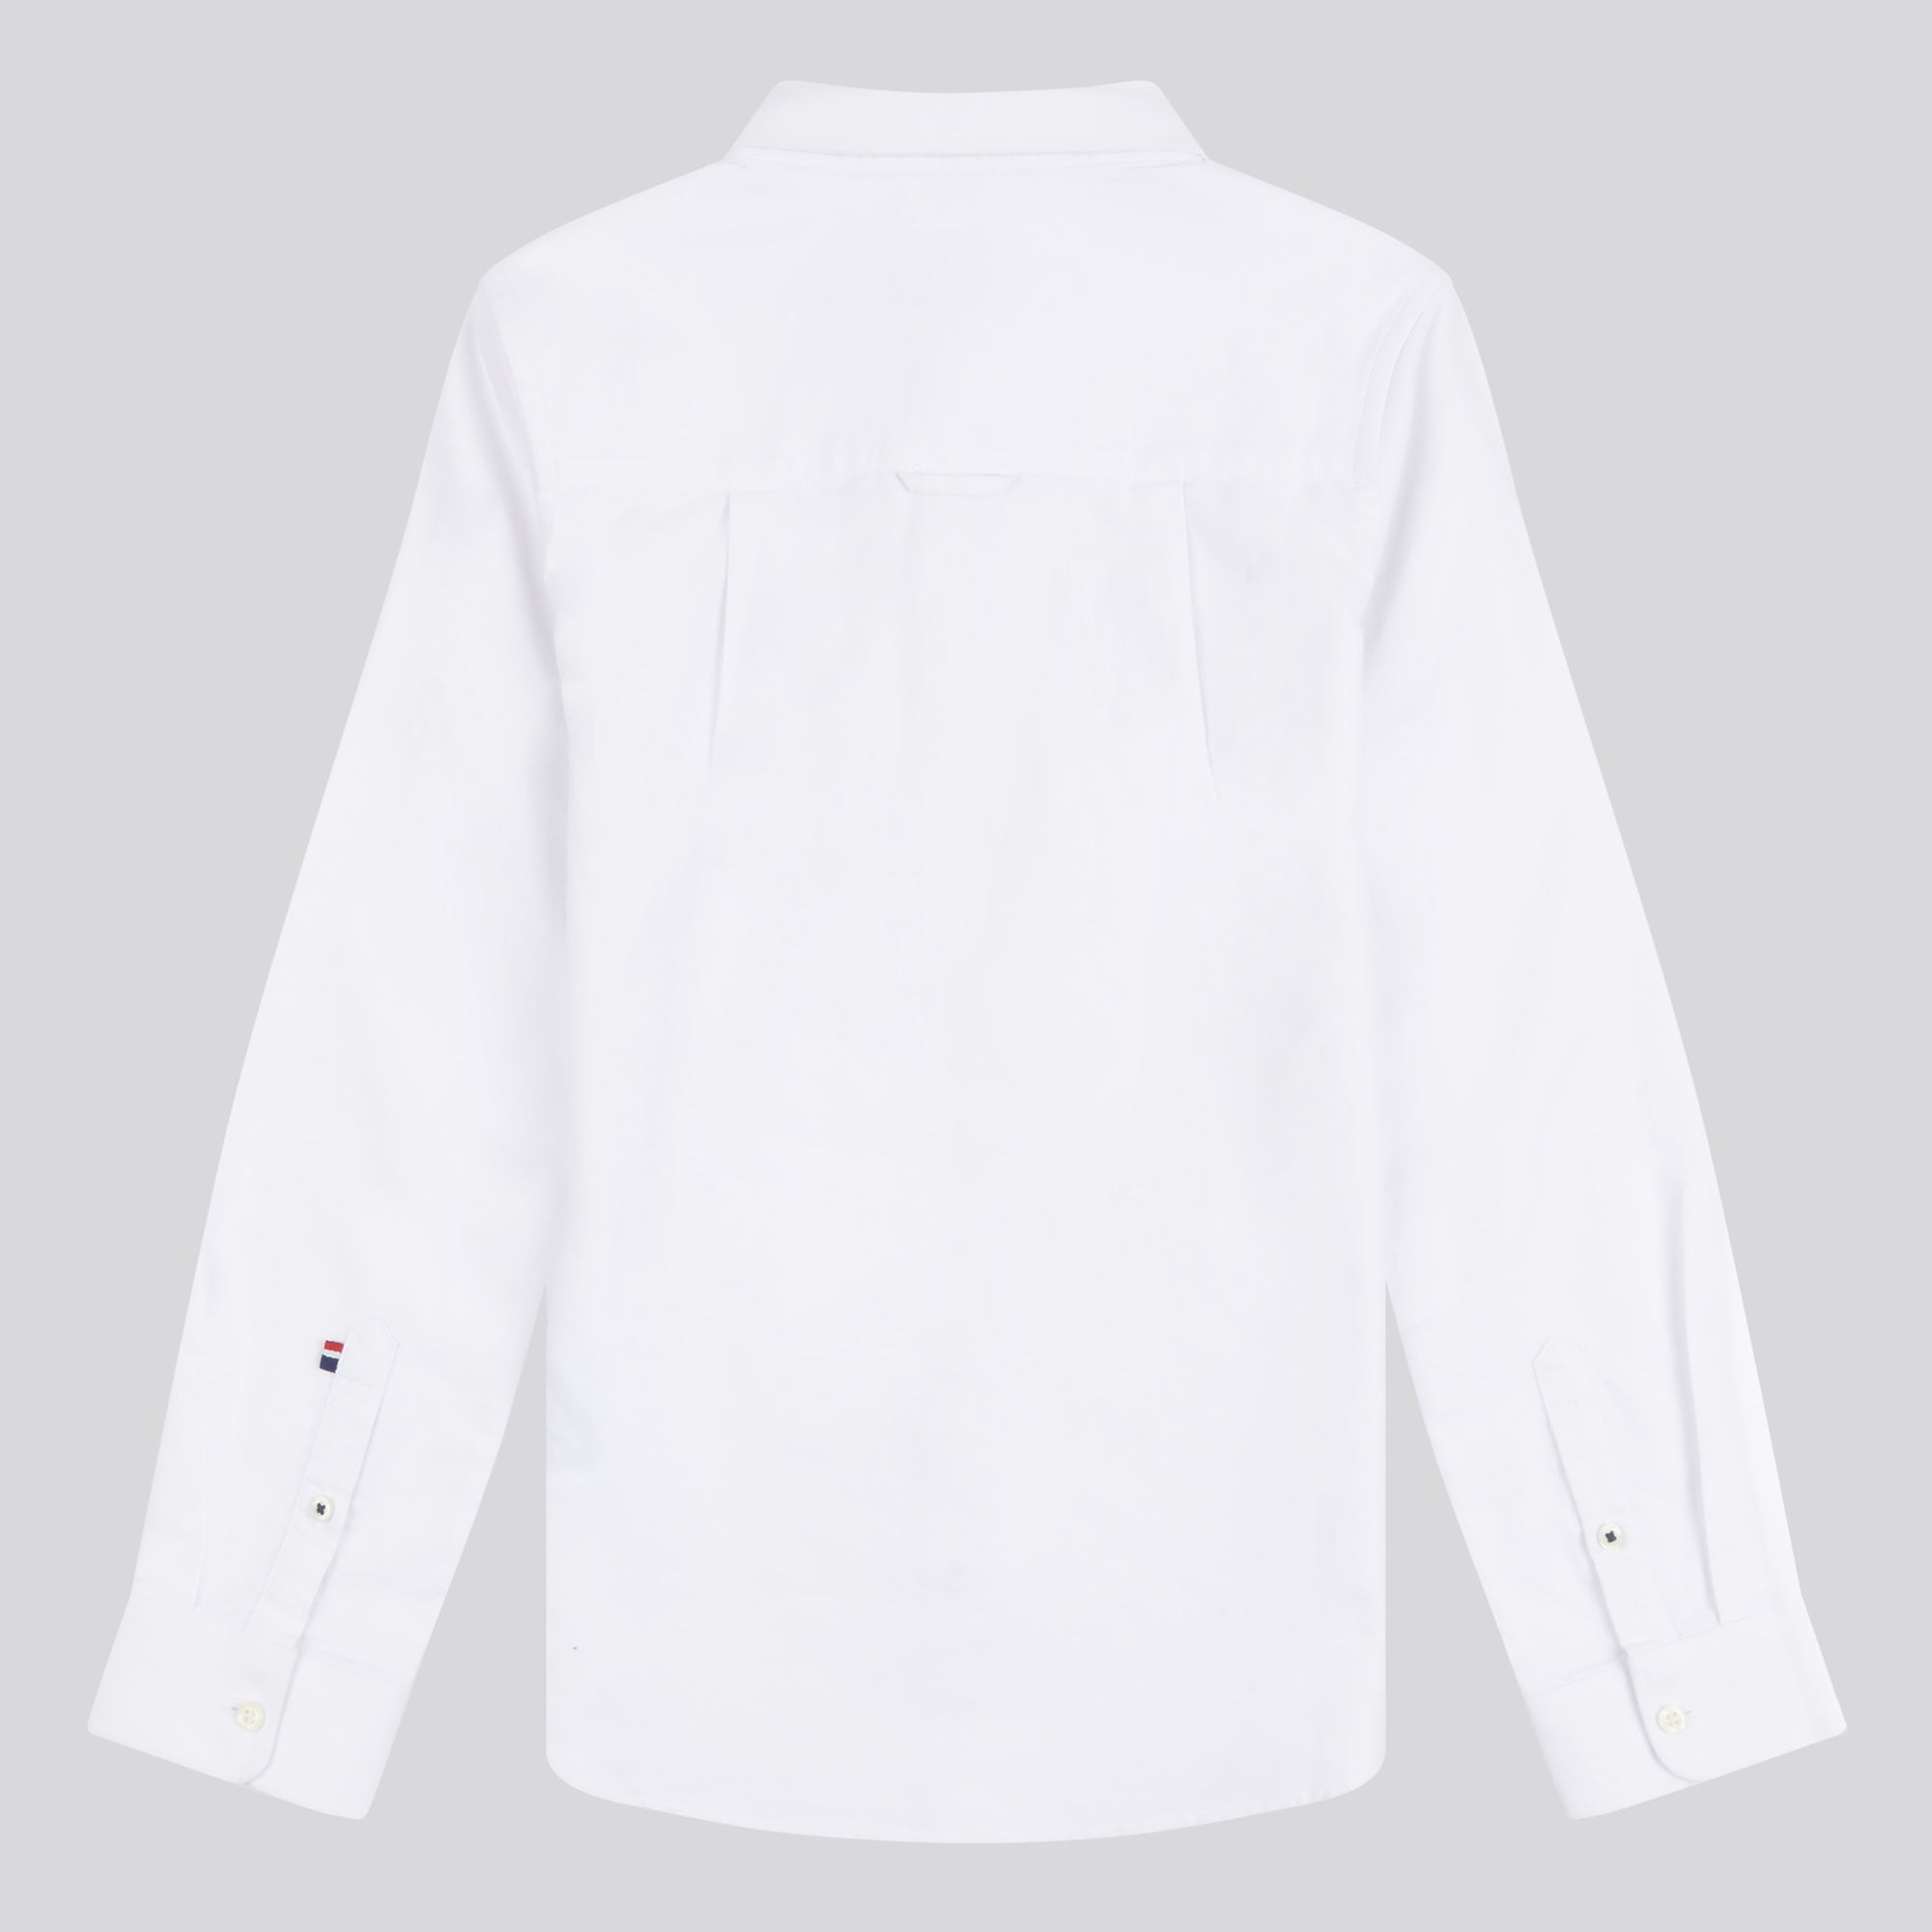 Boys Peached Oxford Shirt in Bright White